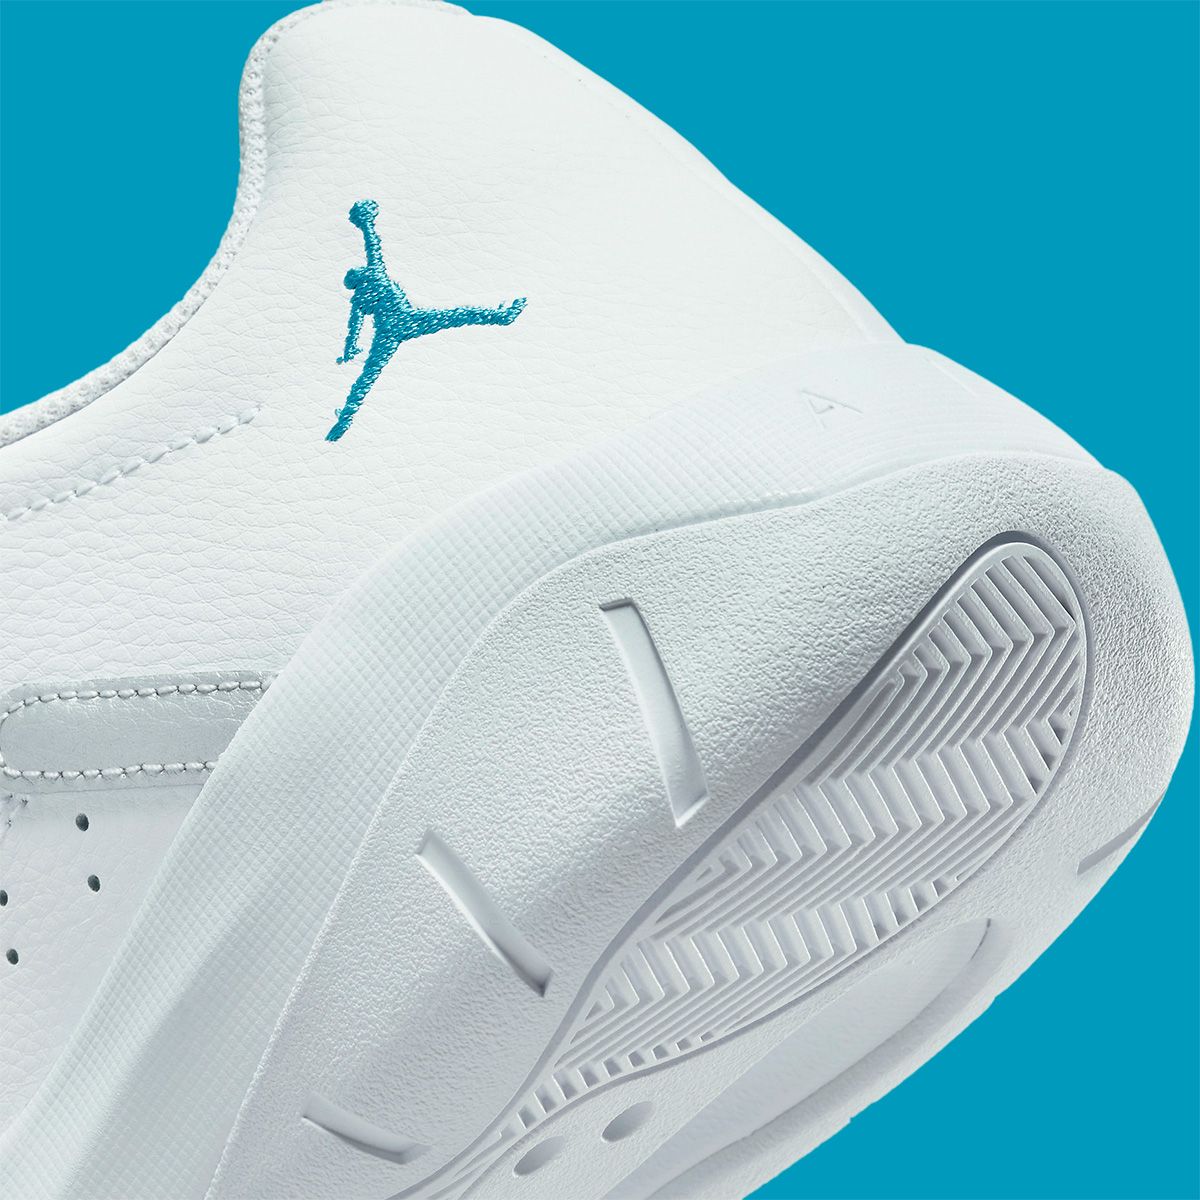 New Air Jordan 11 Low CMFT Appears in White, Silver and Teal Blue ...